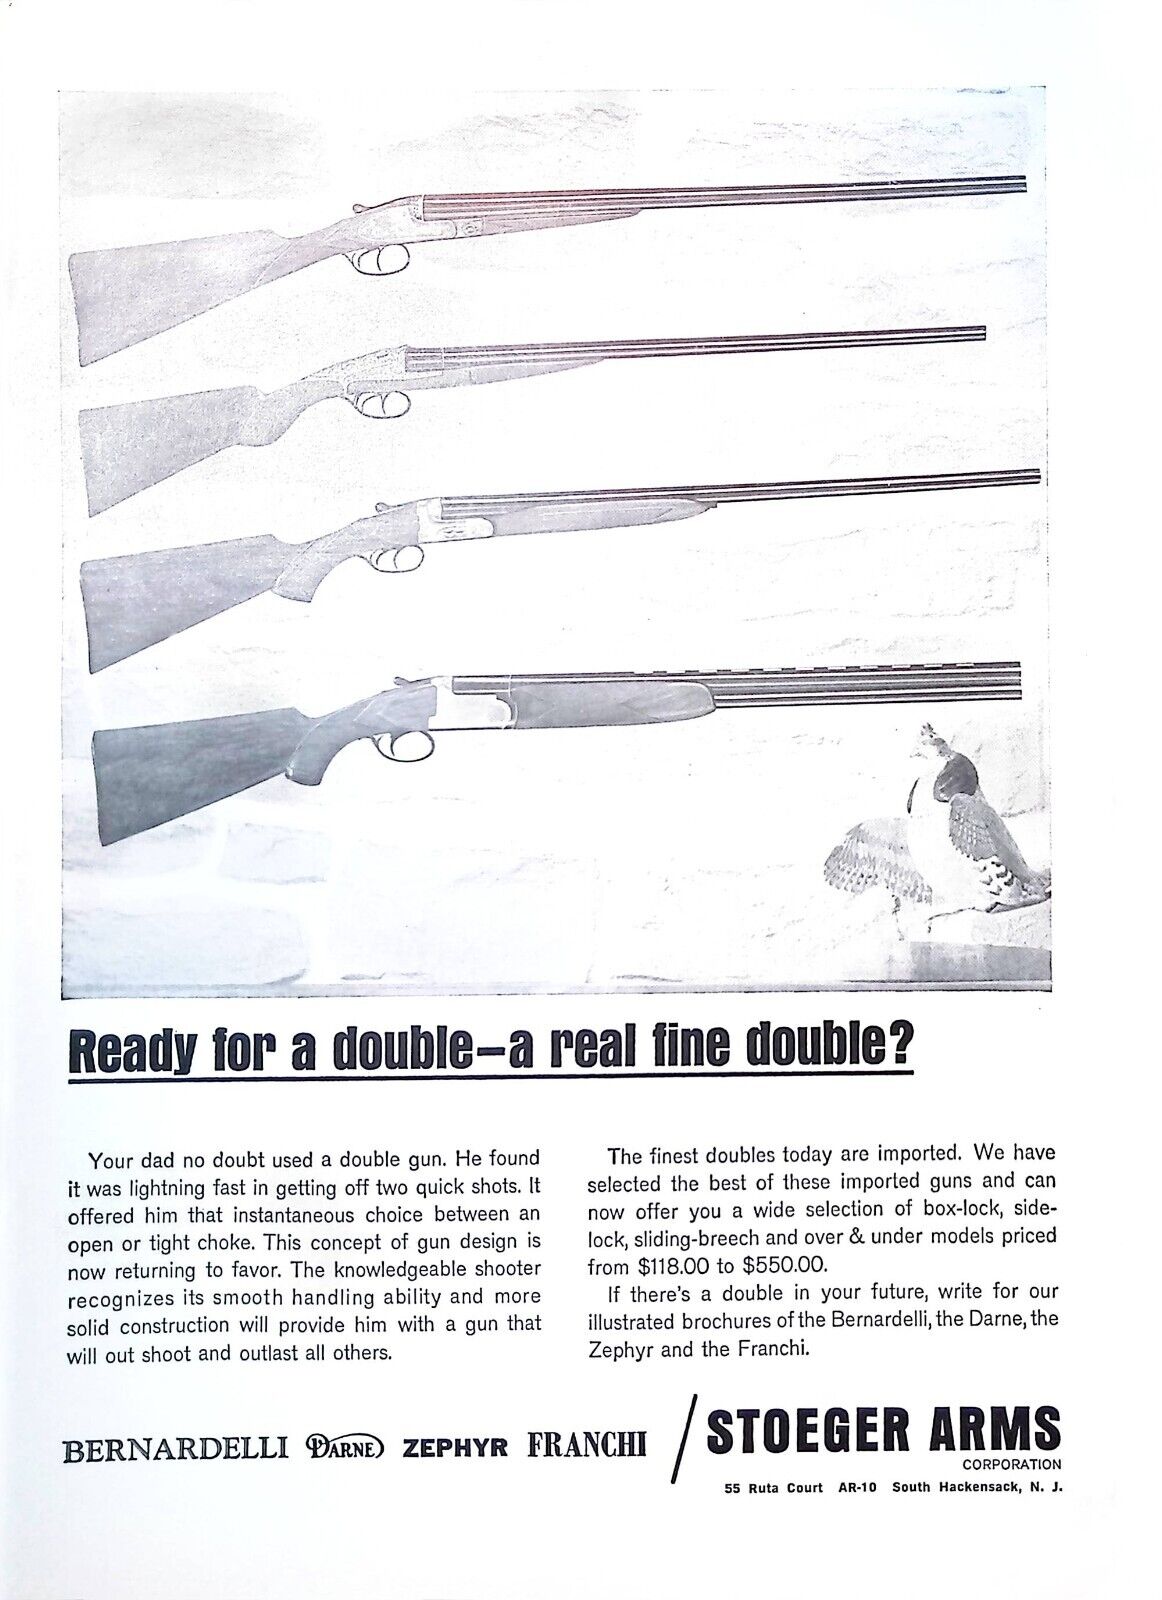 Stoeger Arms Advertising Print Ad American Rifleman Magazine October 1964